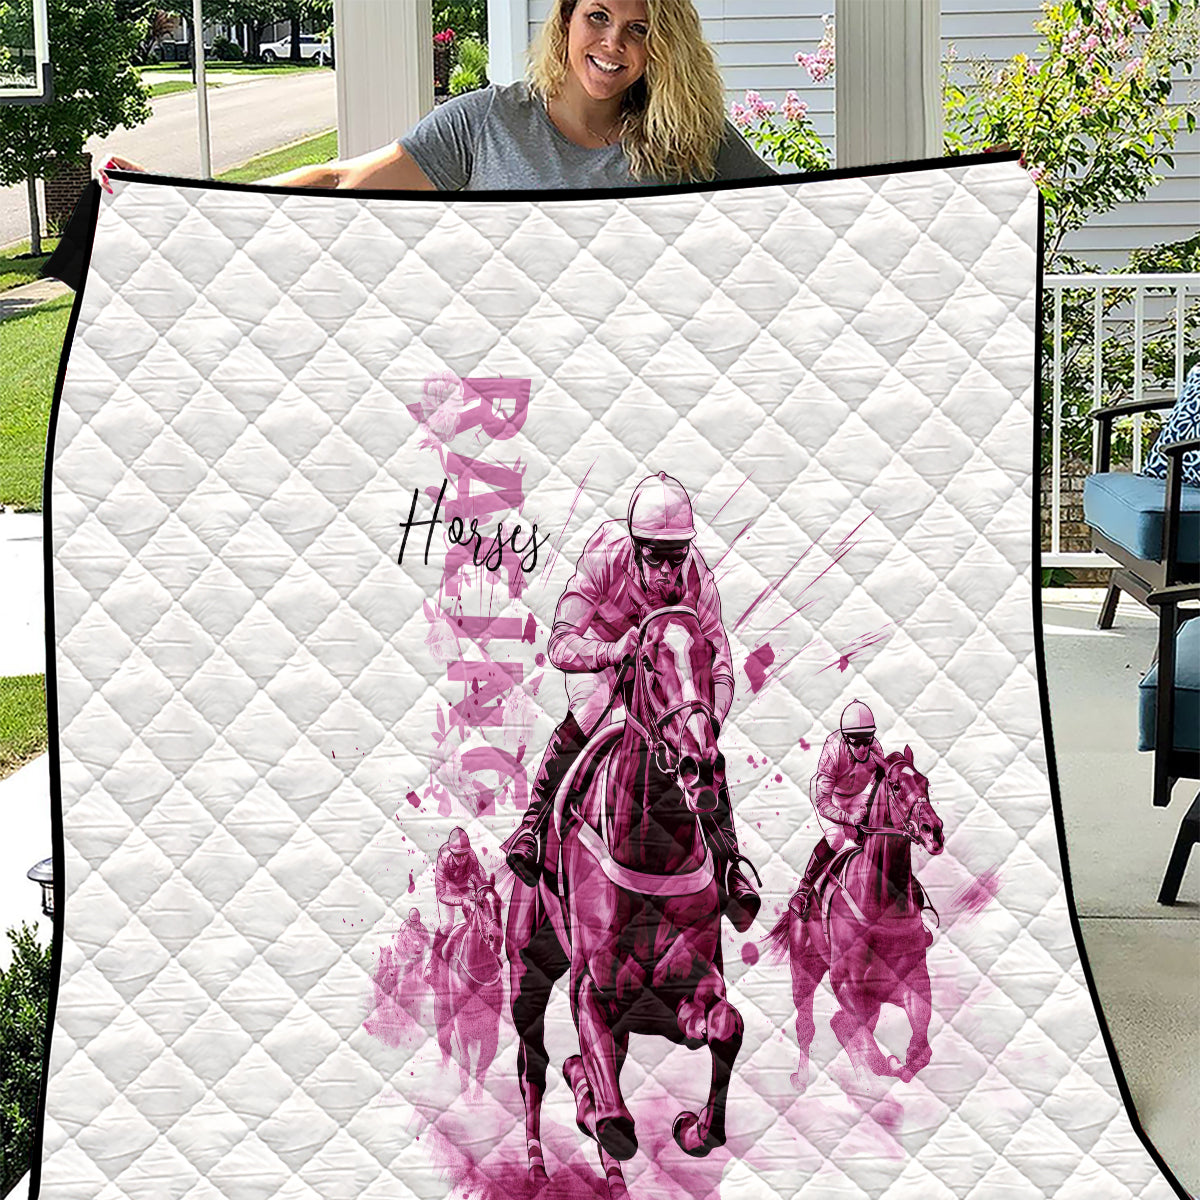 Kentucky Horses Racing Quilt Jockey Drawing Style Pink Out Color